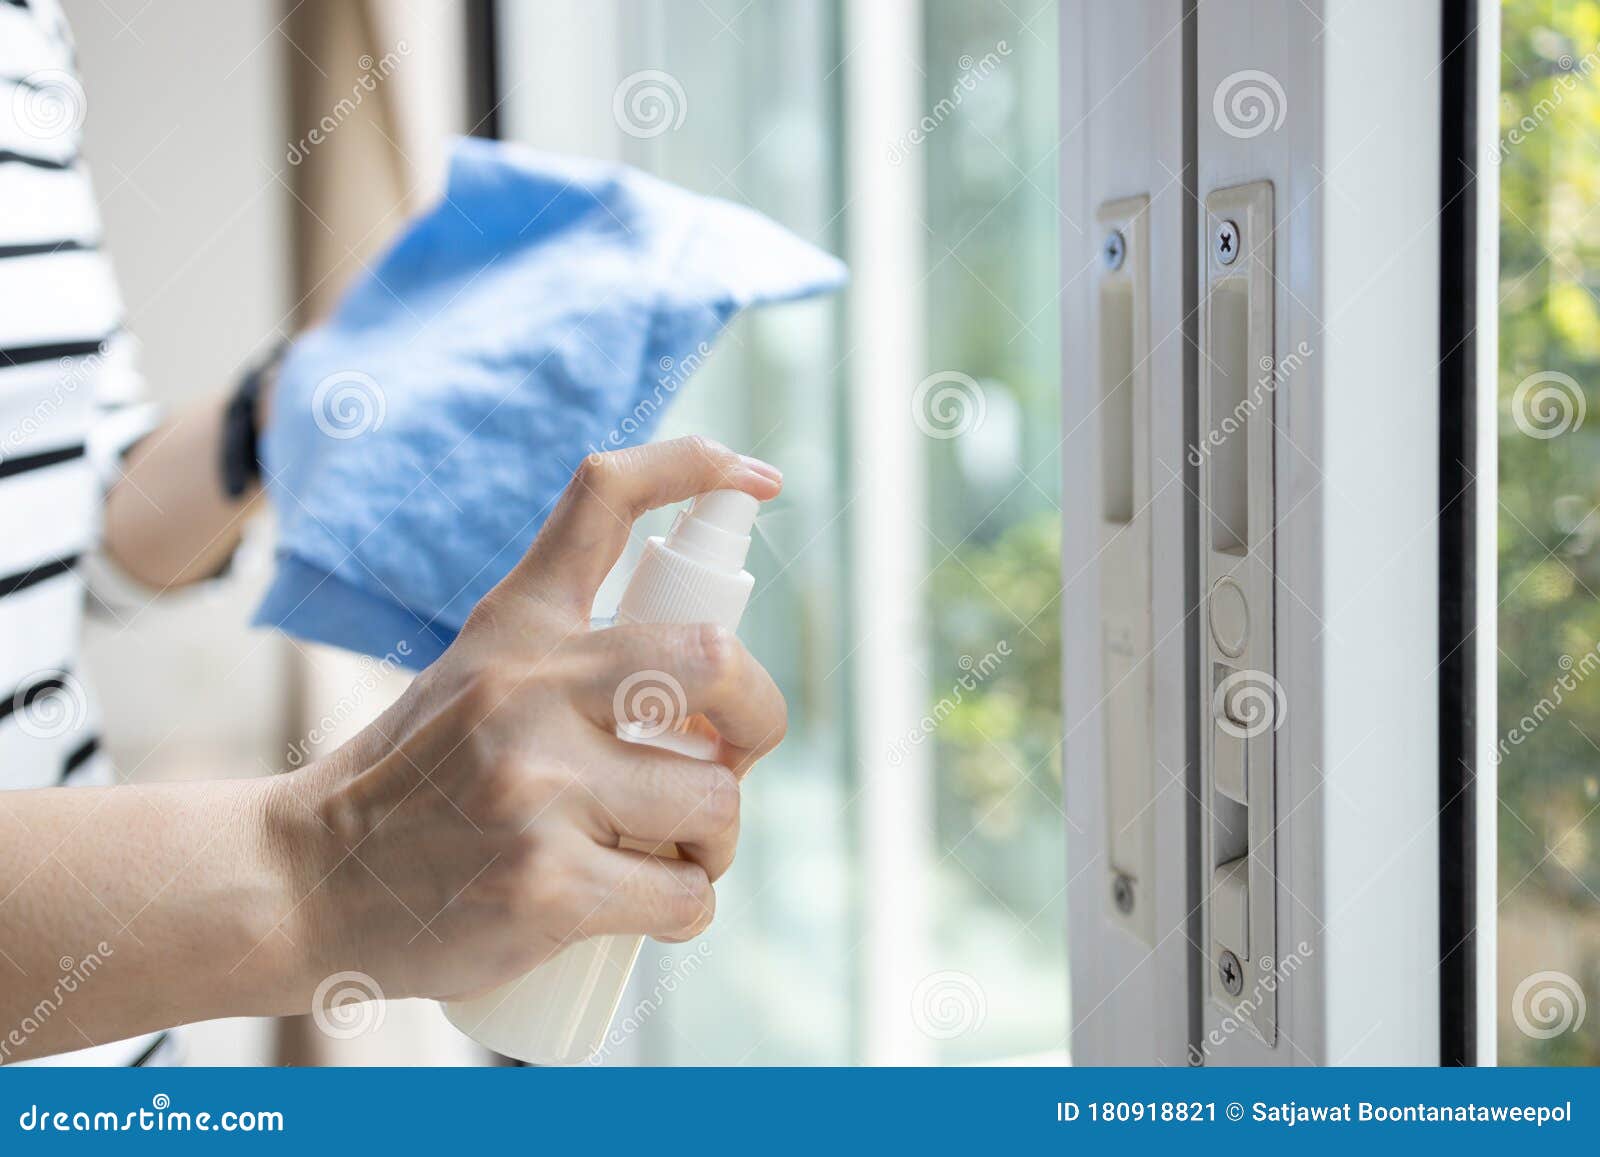 hands of woman with spraying alcohol antiseptic,disinfecting spray,cleaning the front door,sliding glass door handle during the